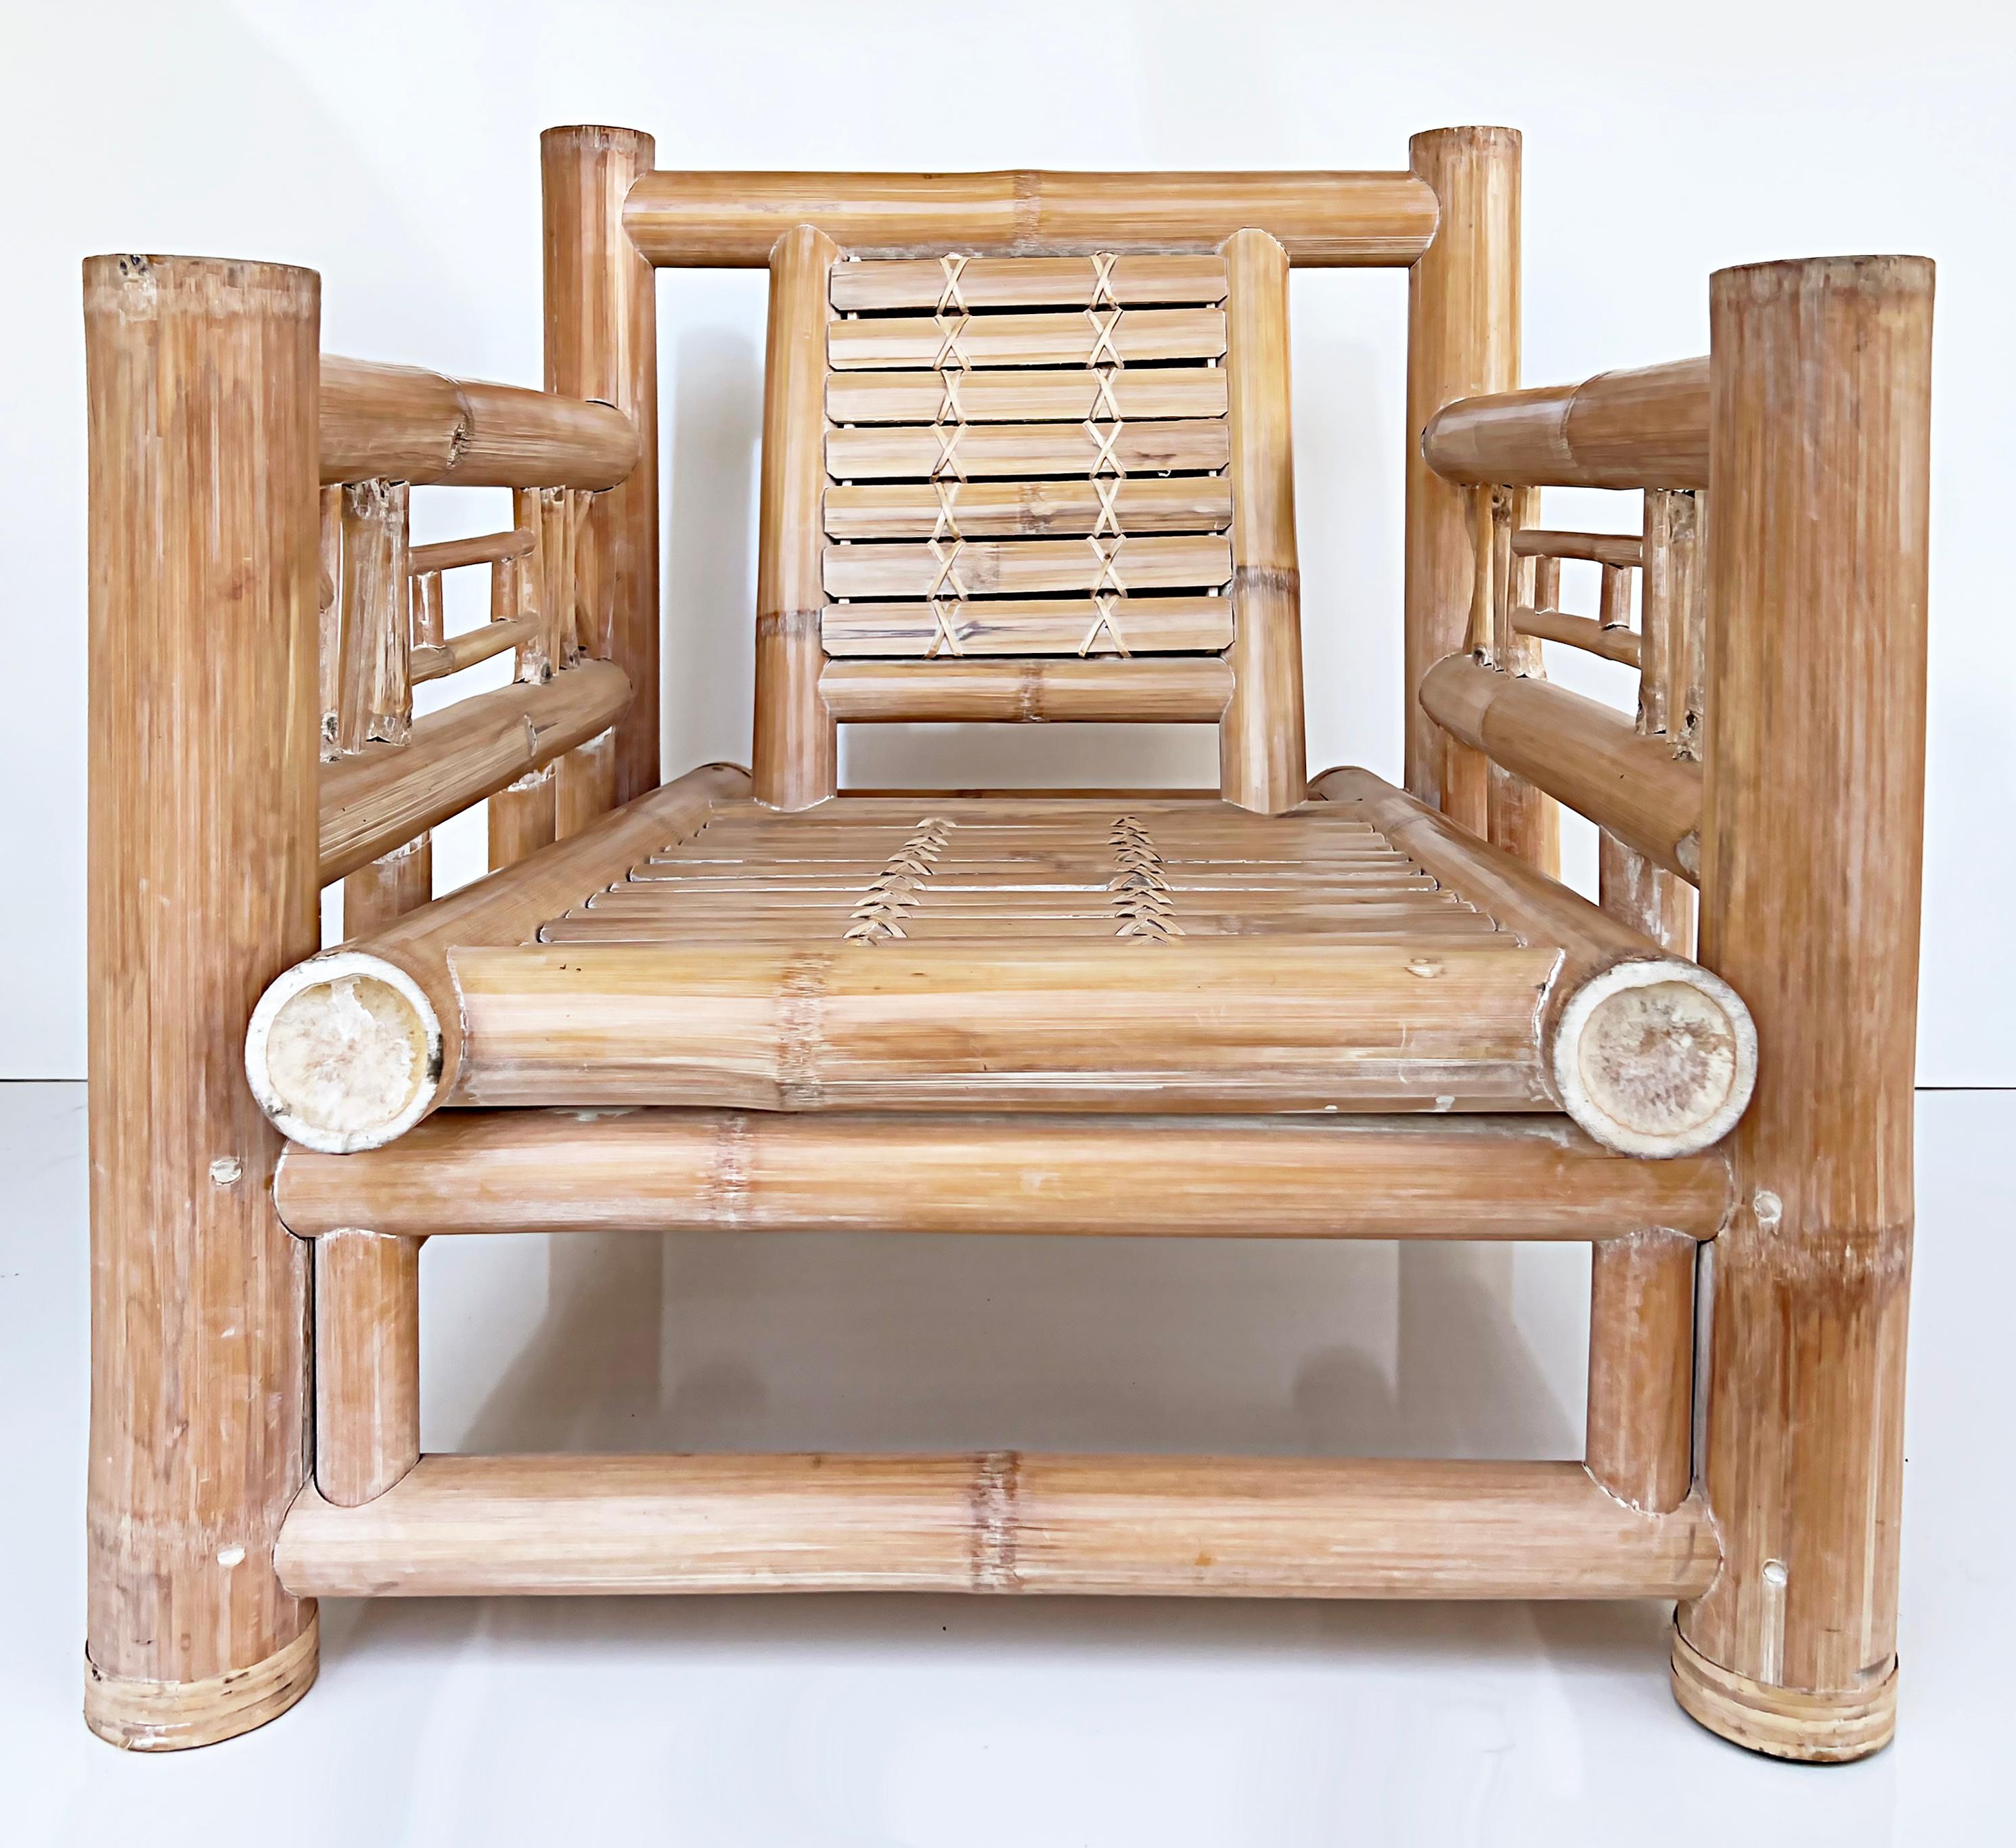 Antonio Budji Layug Style Vintage Coastal Bamboo Chair

Offered for sale is a vintage Coastal bamboo chair in the manner of Antonio Budji Layug. The frame has a white-washed bamboo finish. The chair does not have any cushions and can be fitted as